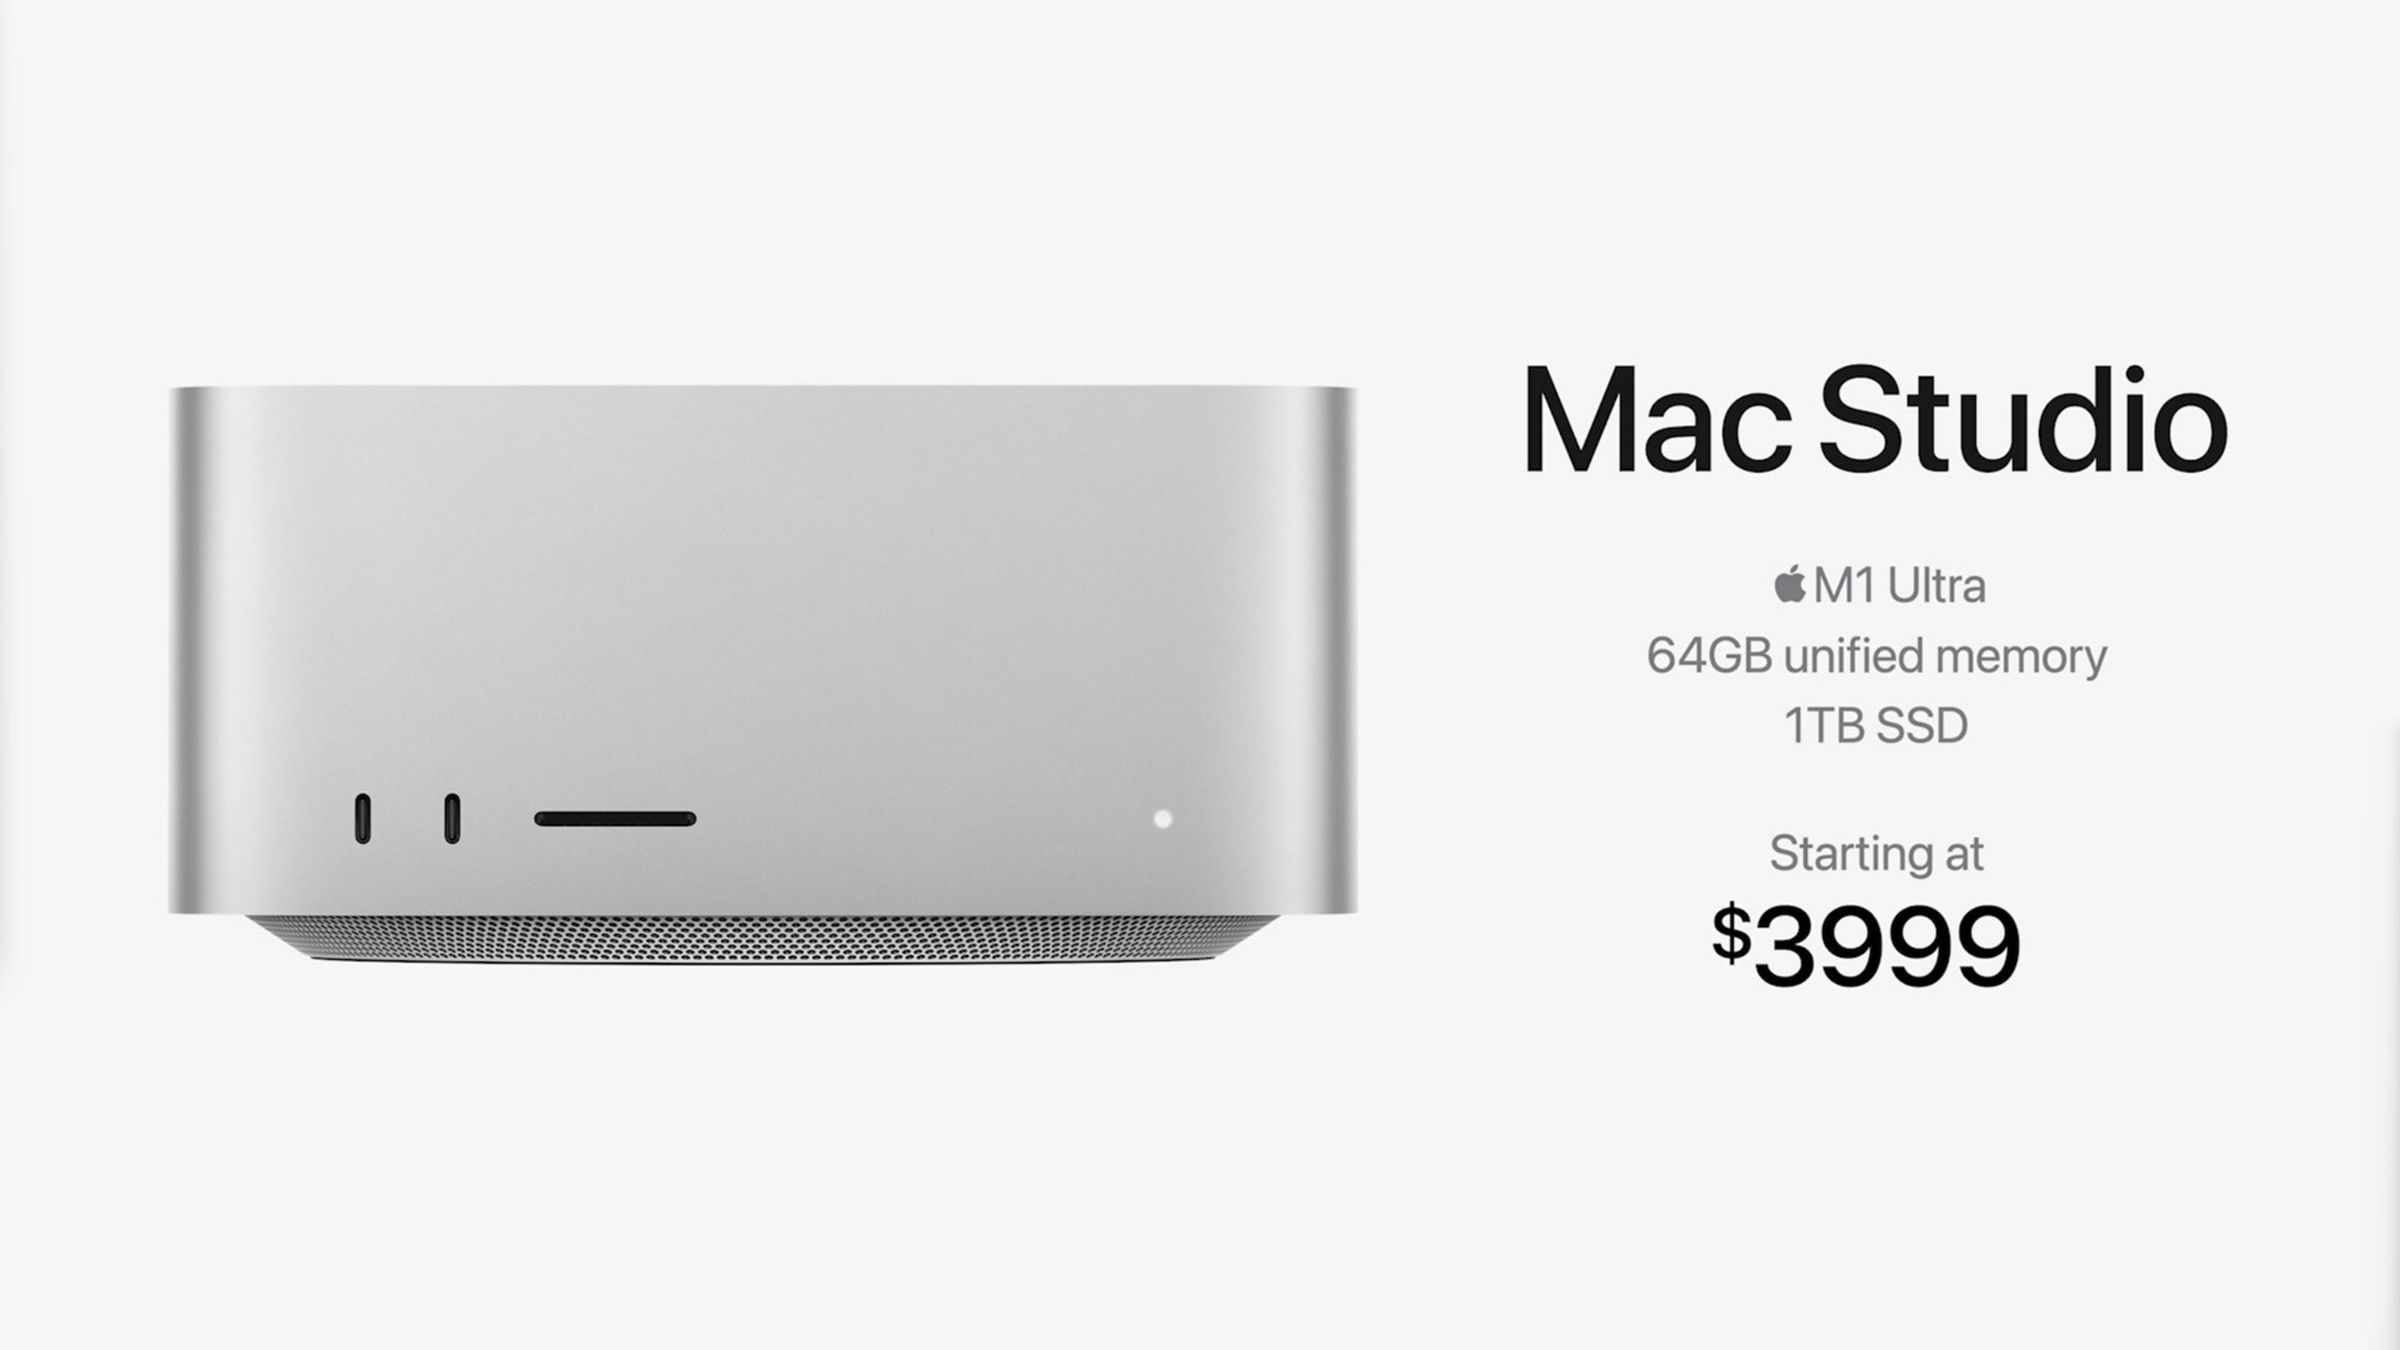 The M1 Ultra Mac Studio starts at $3,999, and includes two more Thunderbolt ports on the front — the ports on the front of the M1 Max version are “just” USB C.